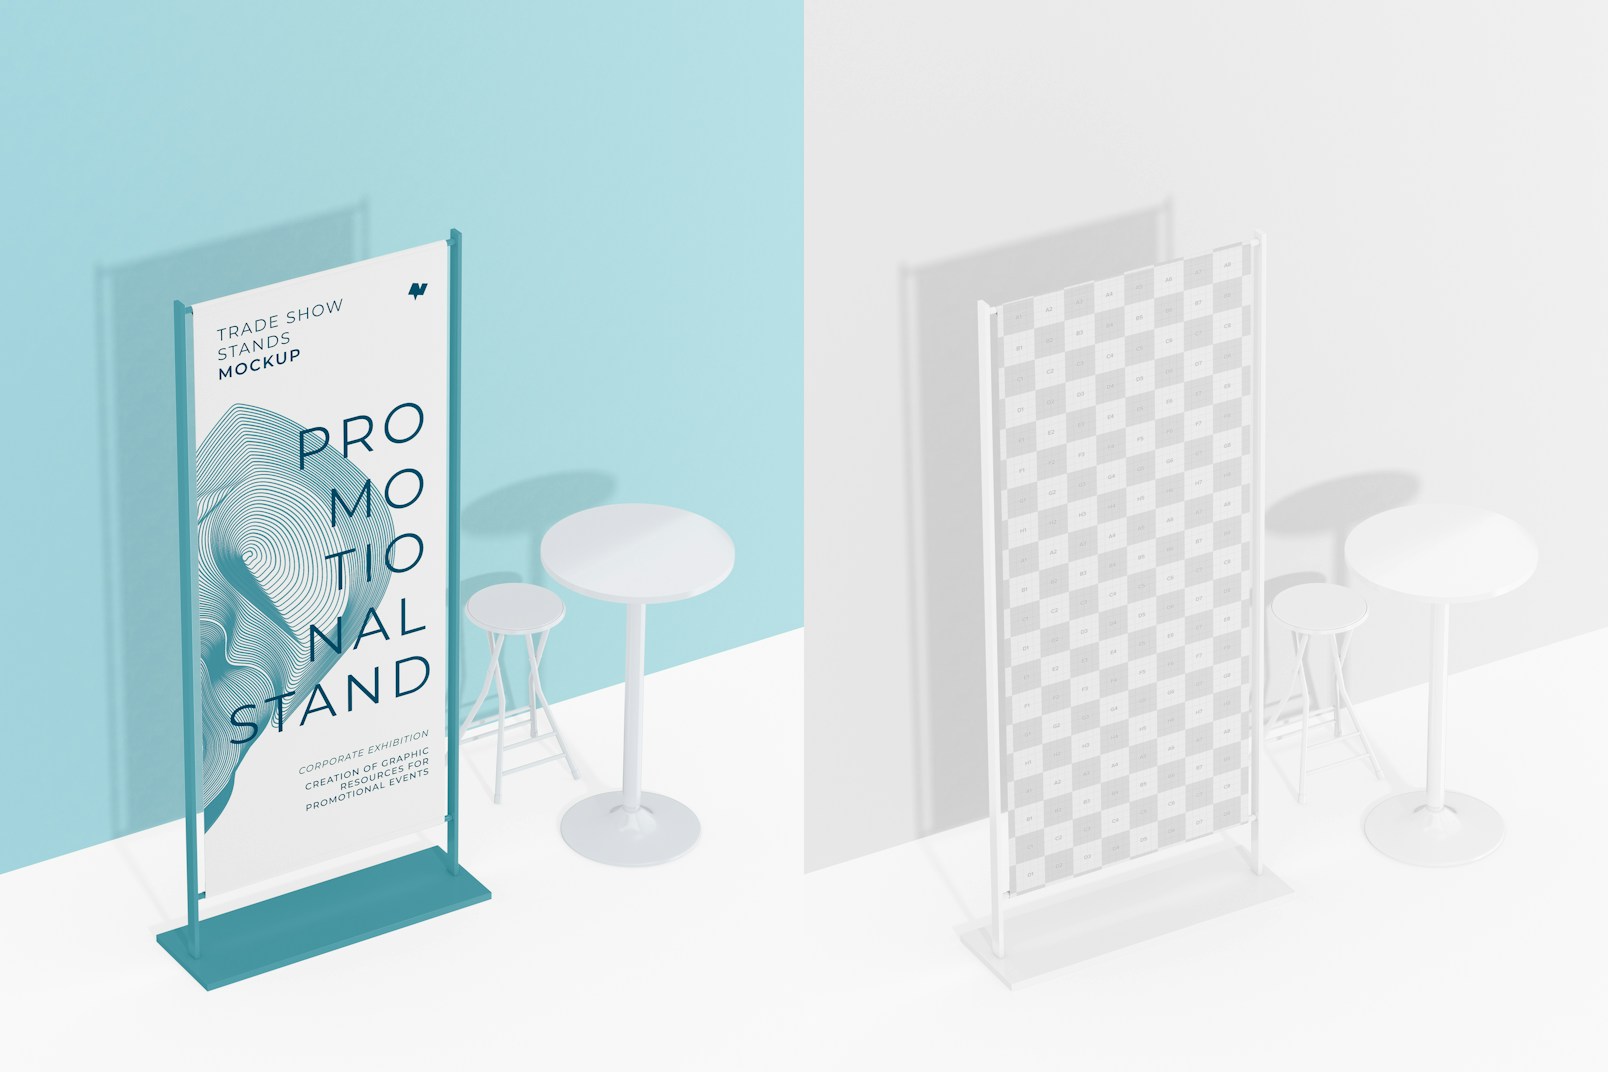 Promotional Stand Mockup, Perspective